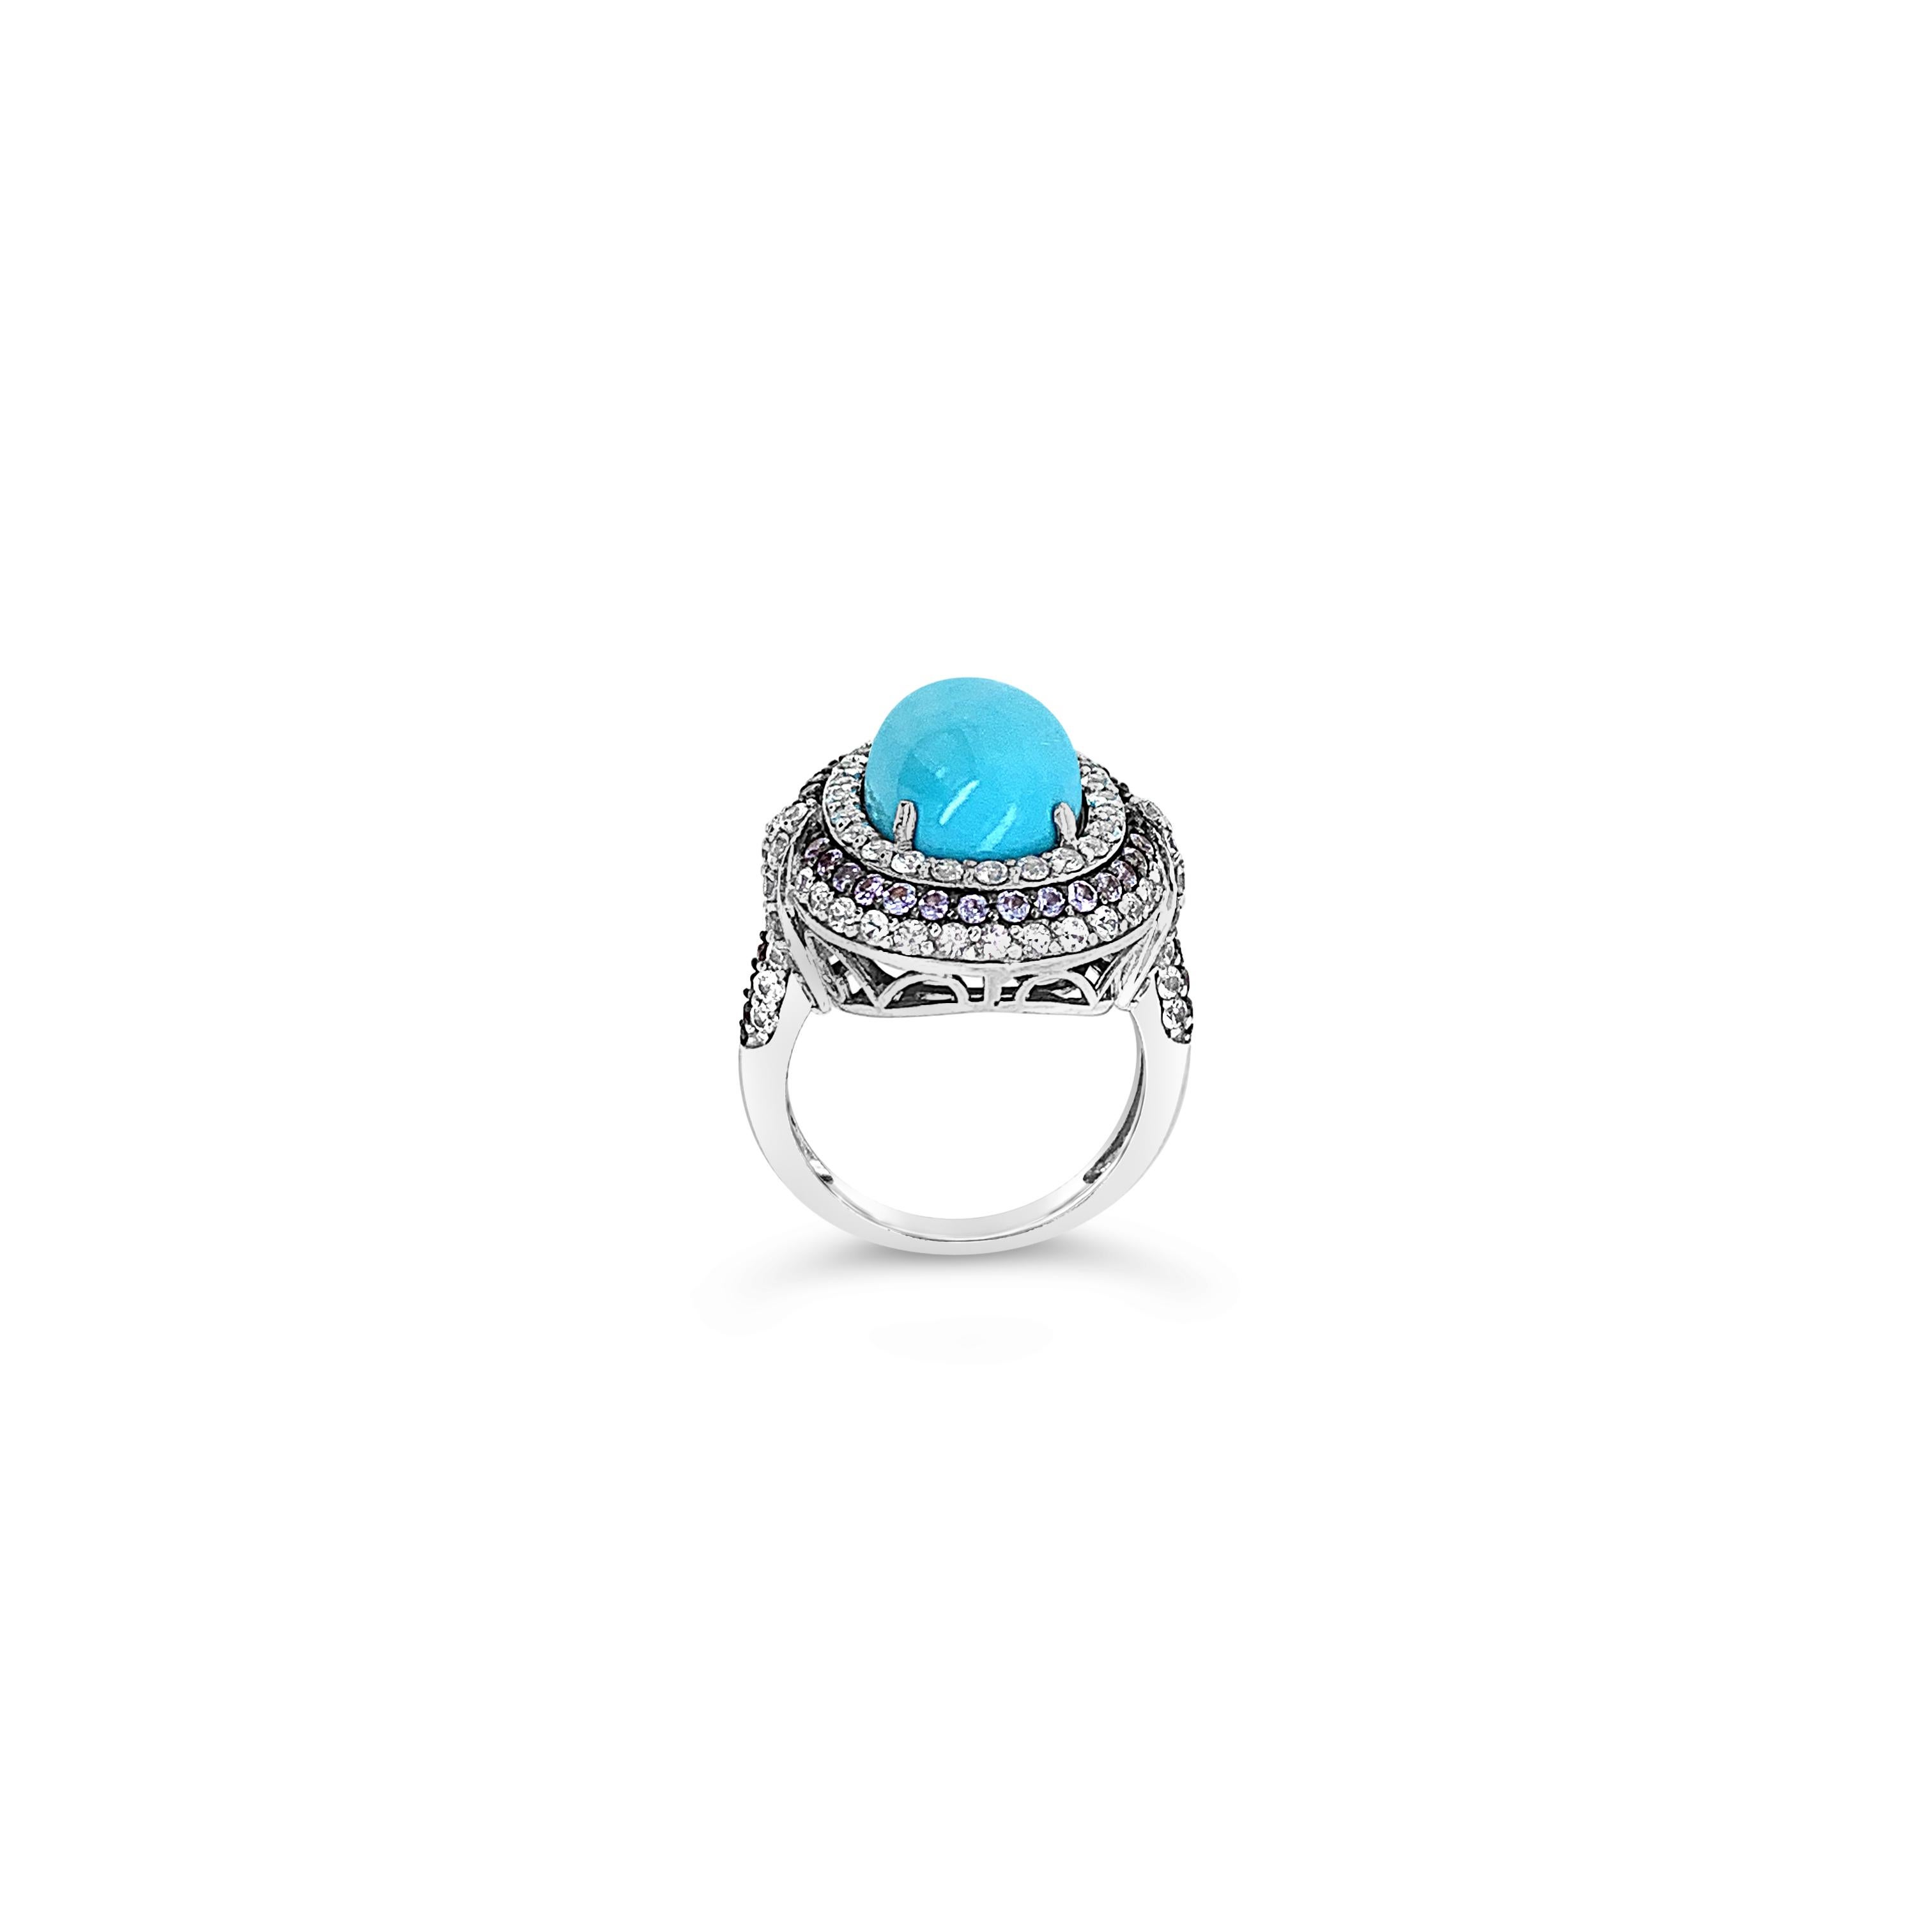 Carlo Viani® Ring featuring 6 3/8 cts. Robins Egg Blue Turquoise™, 1 1/4 cts. White Sapphire, 5/8 cts. Blueberry Tanzanite®,  set in 14K Vanilla Gold®

Diamonds Breakdown:
None

Gems Breakdown:
6 3/8 cts Turquoise
1 1/4 cts White Sapphire
5/8 cts